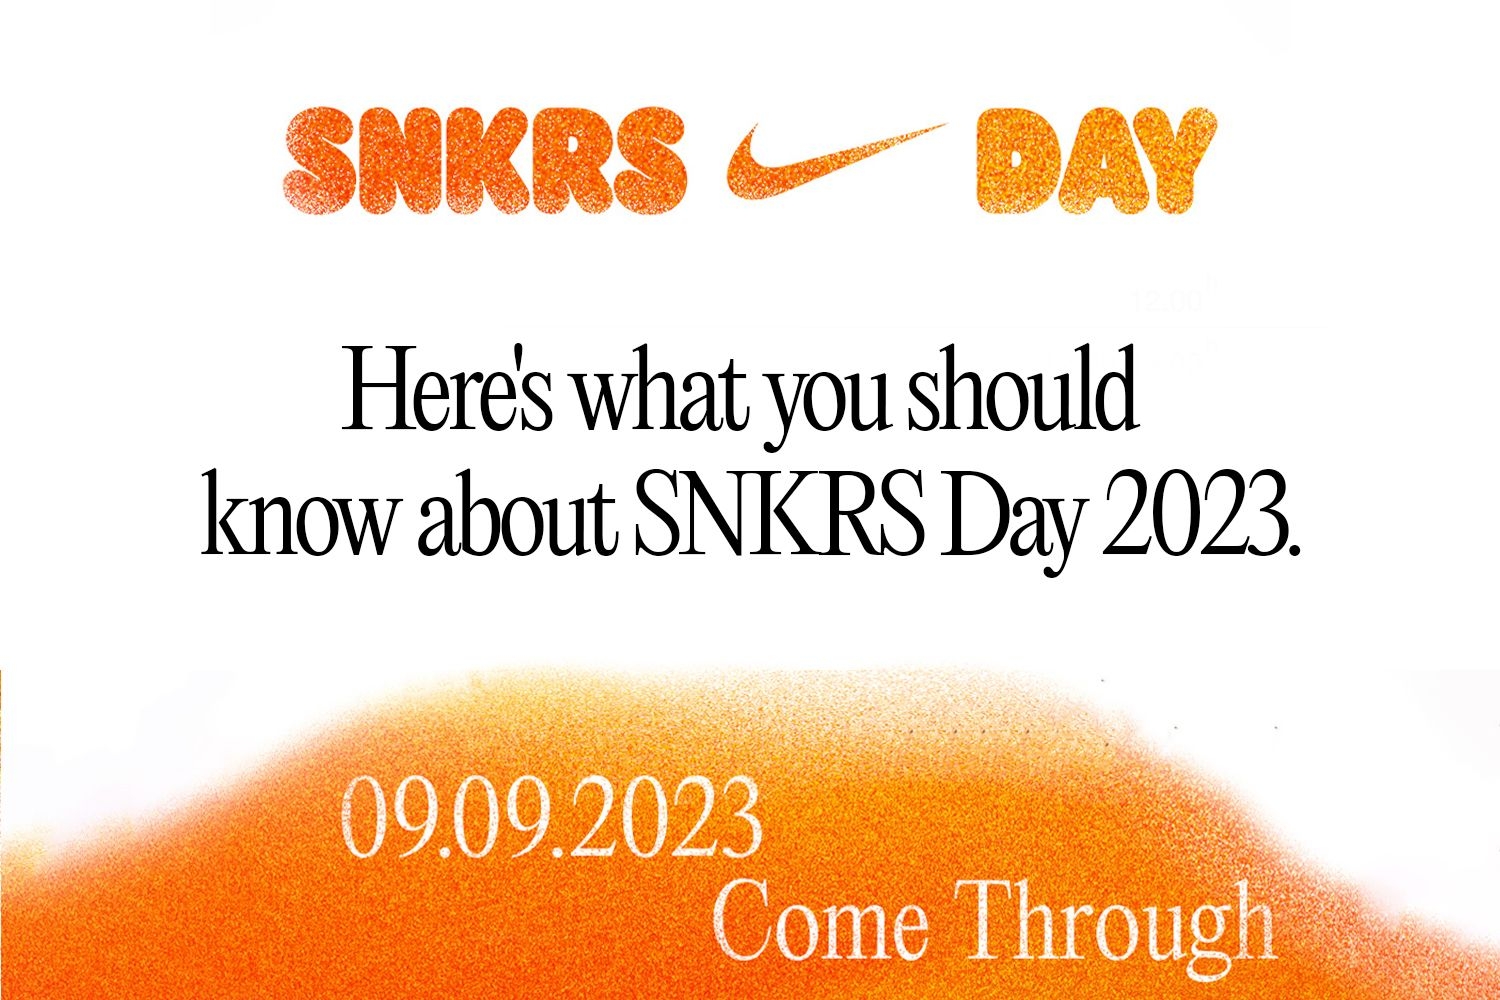 Everything you need to know about SNKRS Day 2023